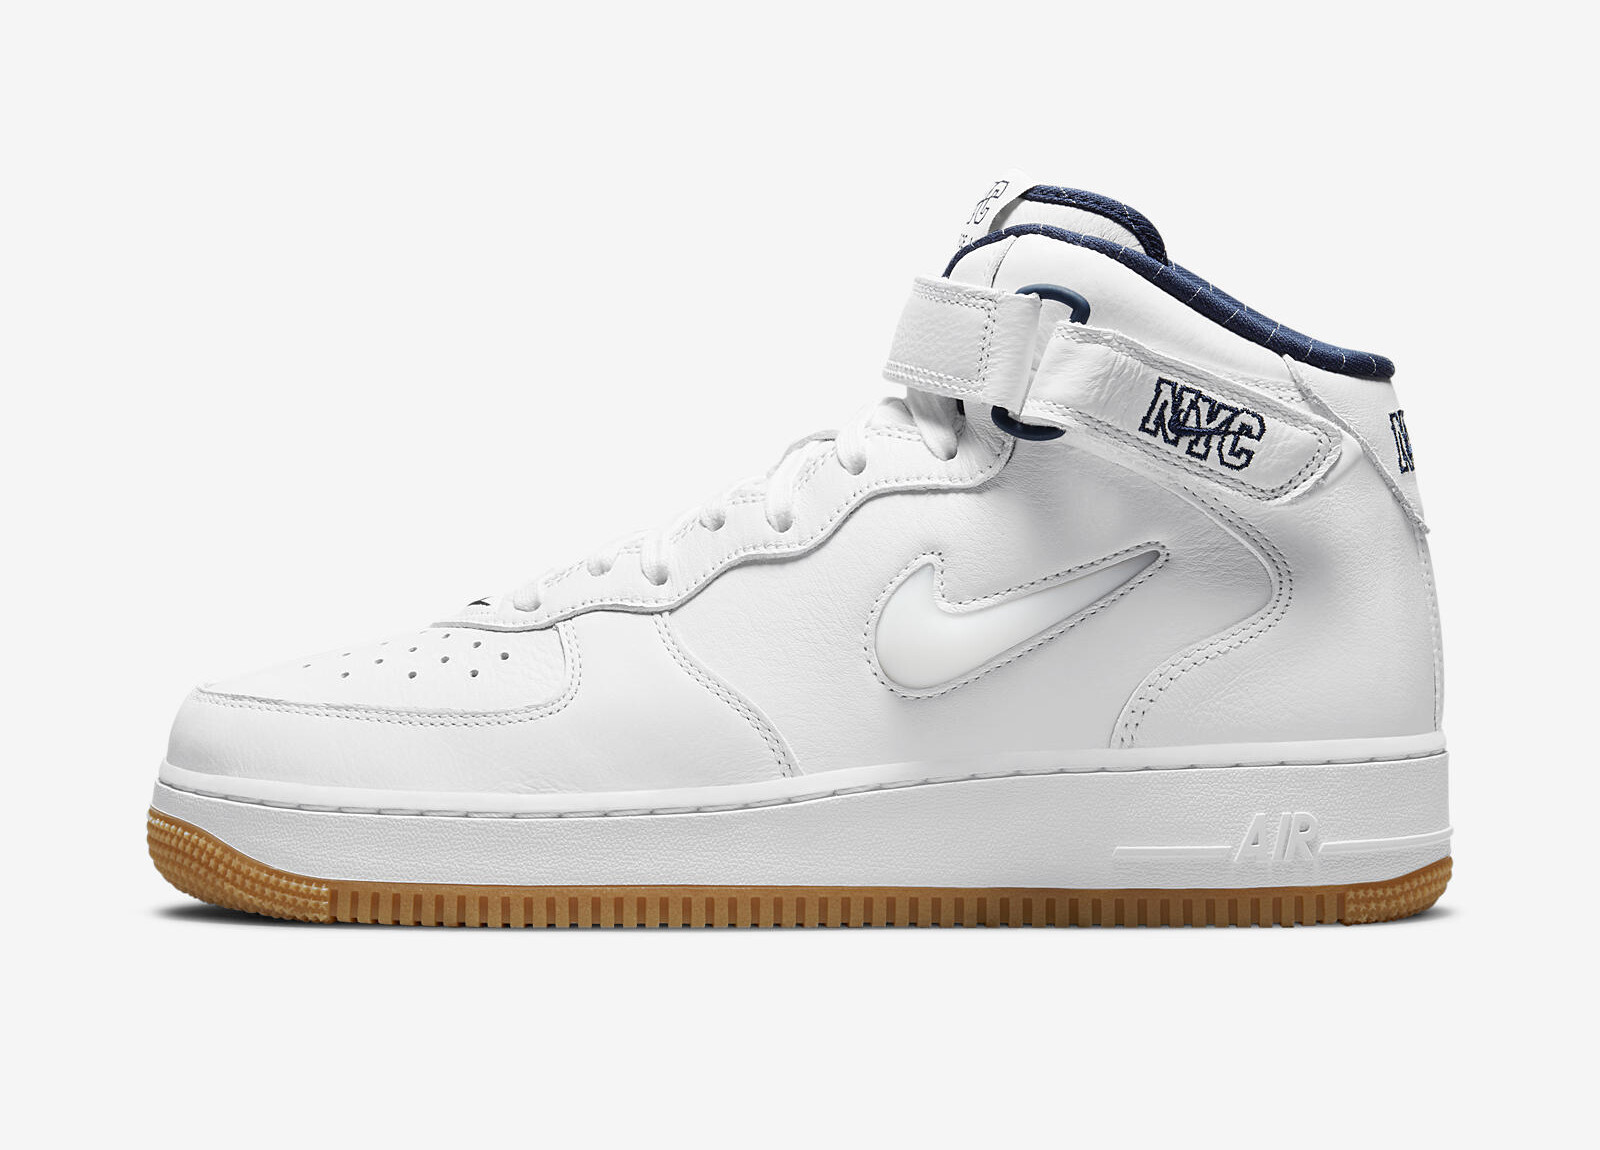 Nike Air Force 1 Mid QS
White / Midnight Navy